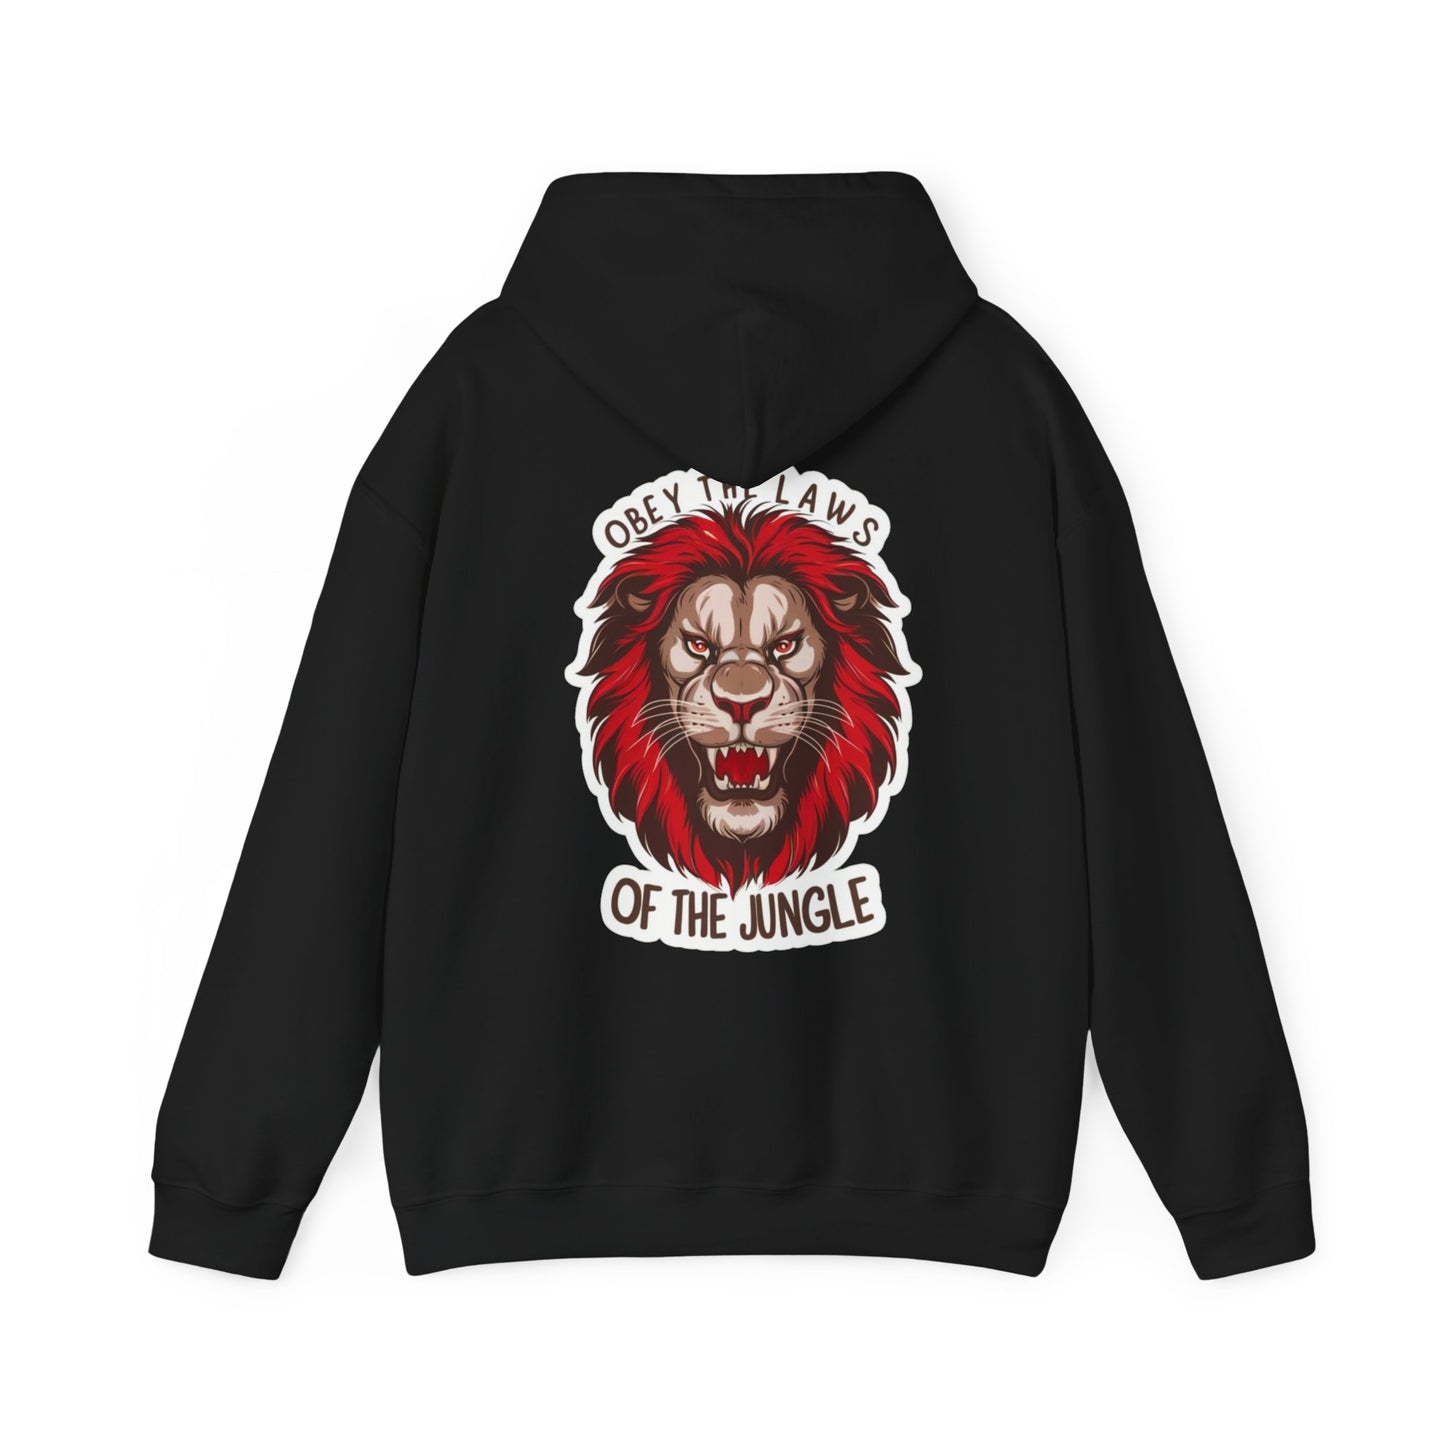 OBEY THE LAWS OF THE JUNGLE CLASSIC HOODIE